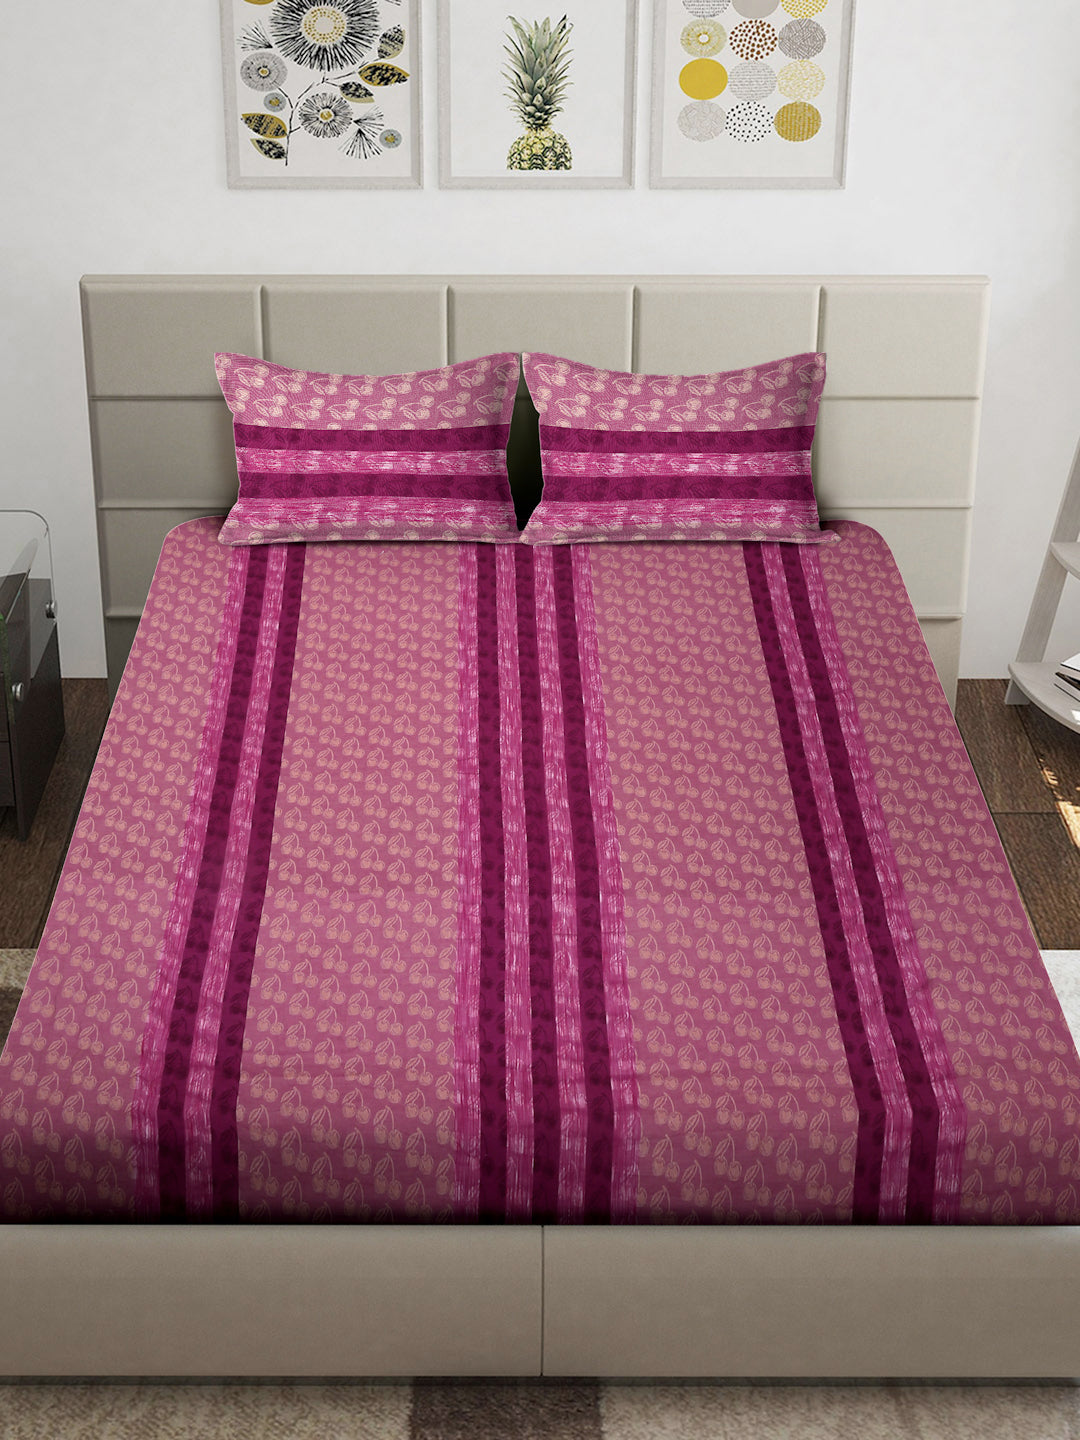 Arrabi Pink Floral 100% Handwoven Cotton Super King Size Bedsheet with 2 Pillow Covers (270 x 260 cm)